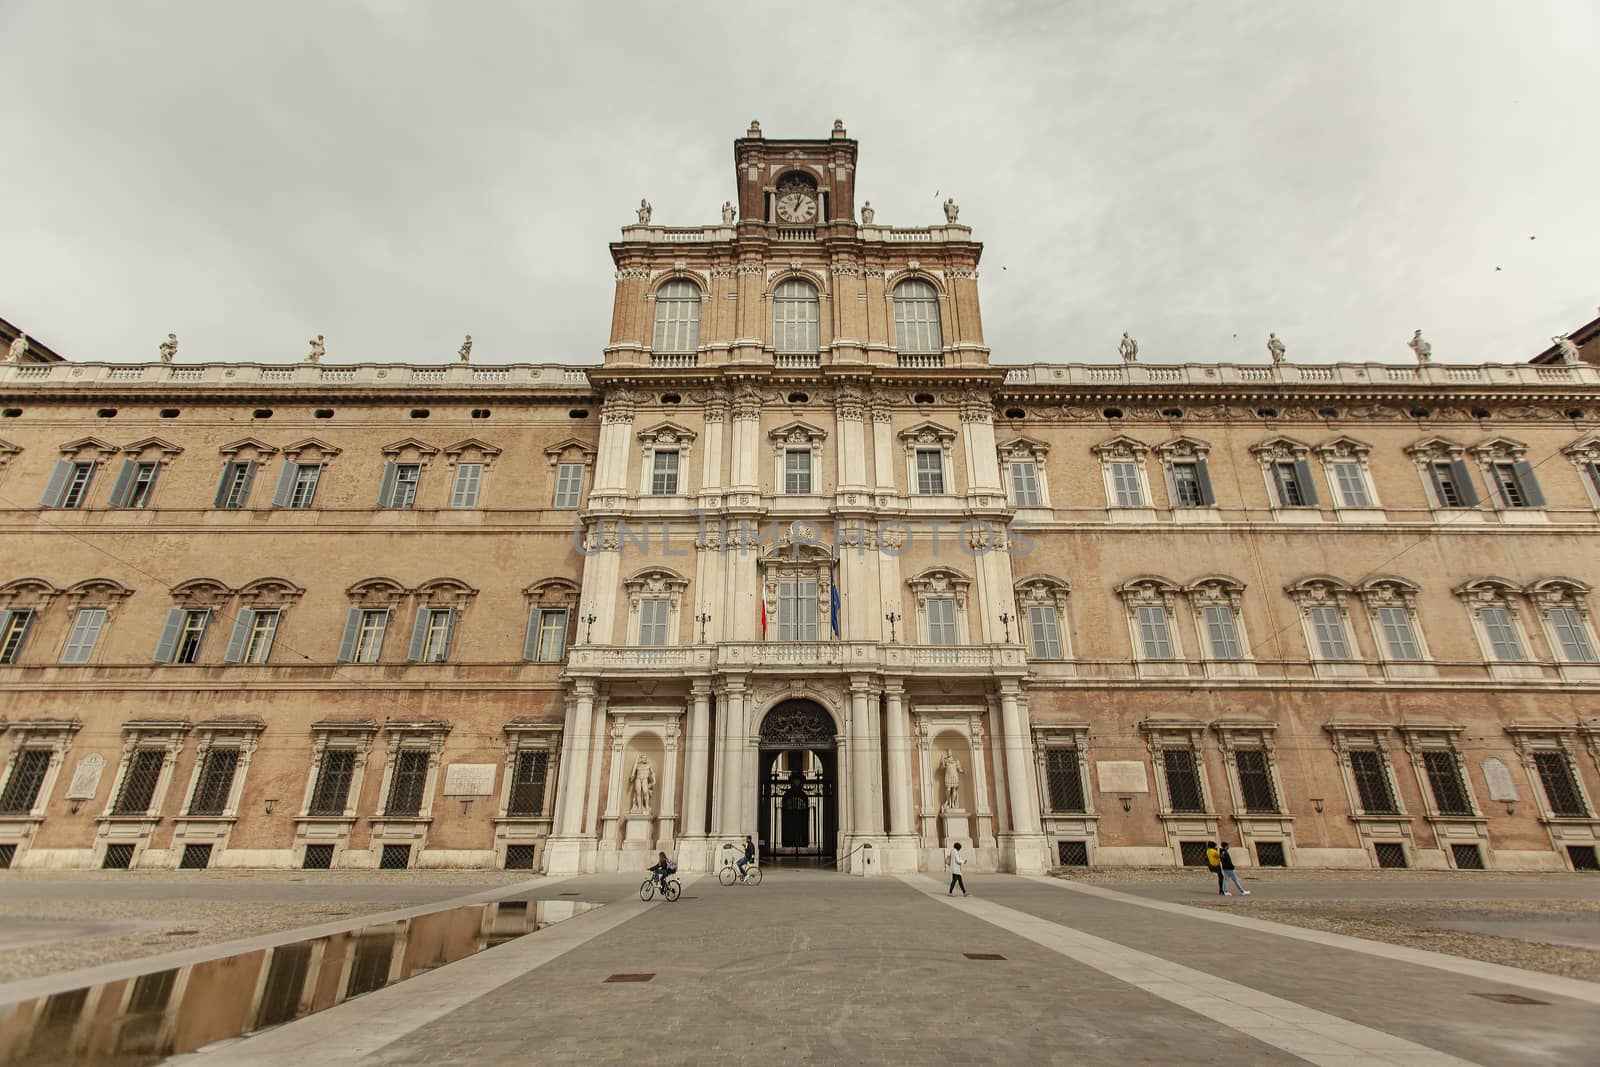 Palazzo Ducale in Modena, Italy by pippocarlot